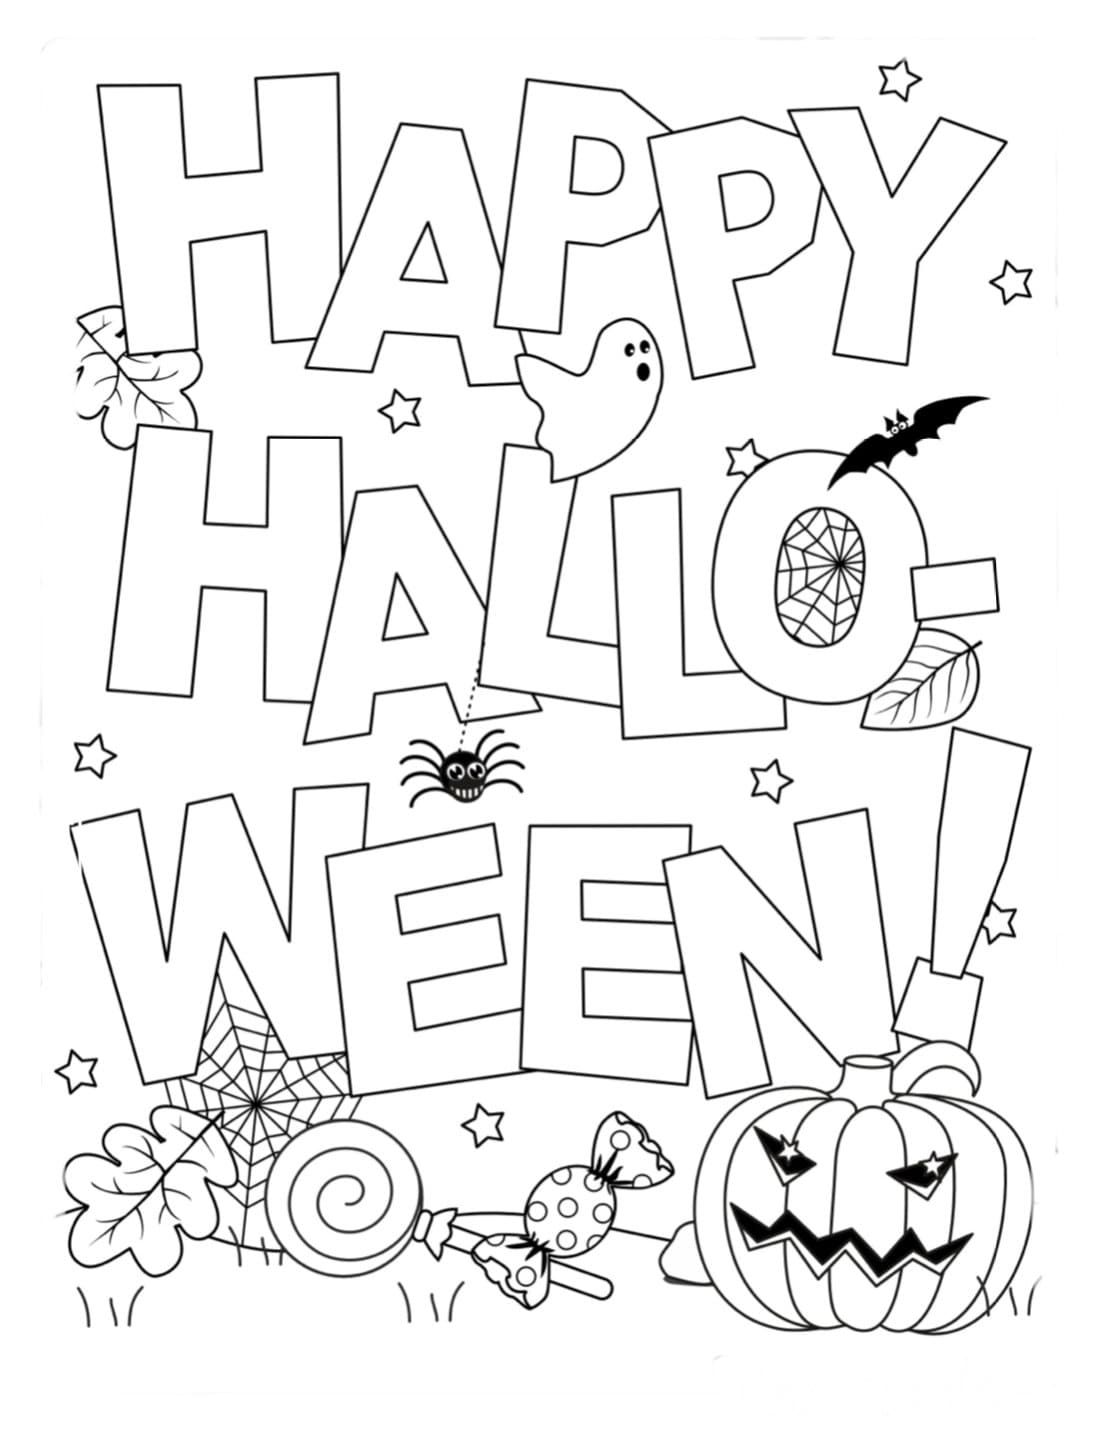 Halloween coloring pages kids halloween colouring pages printable halloween pages kids adults coloring sheets halloween activity ideas instant download â halloween coloring sheets free halloween coloring pages halloween coloring pages